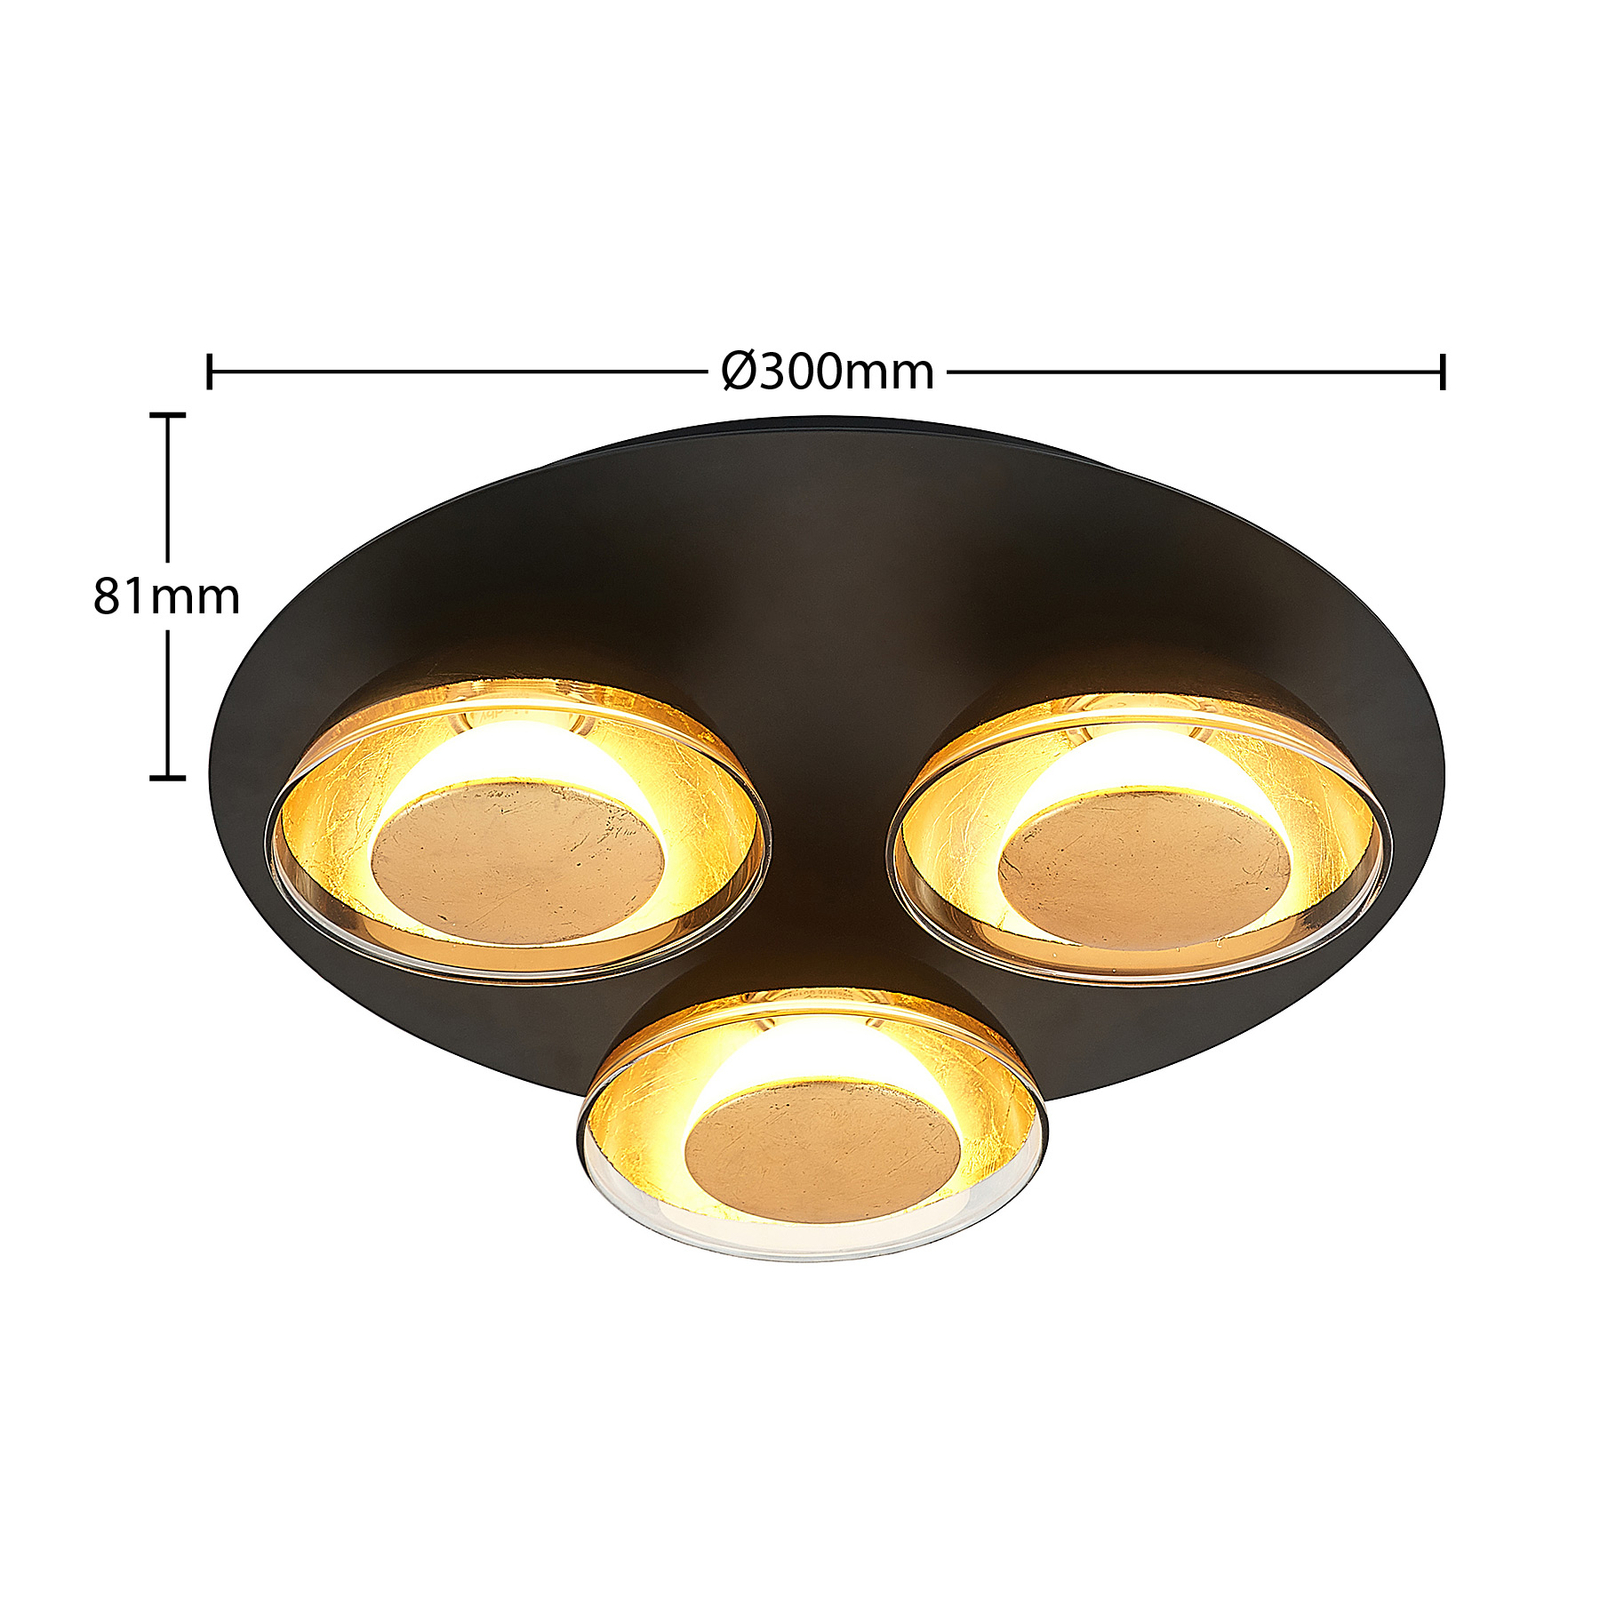 Lindby Erin ceiling lamp black/gold 3-bulb round